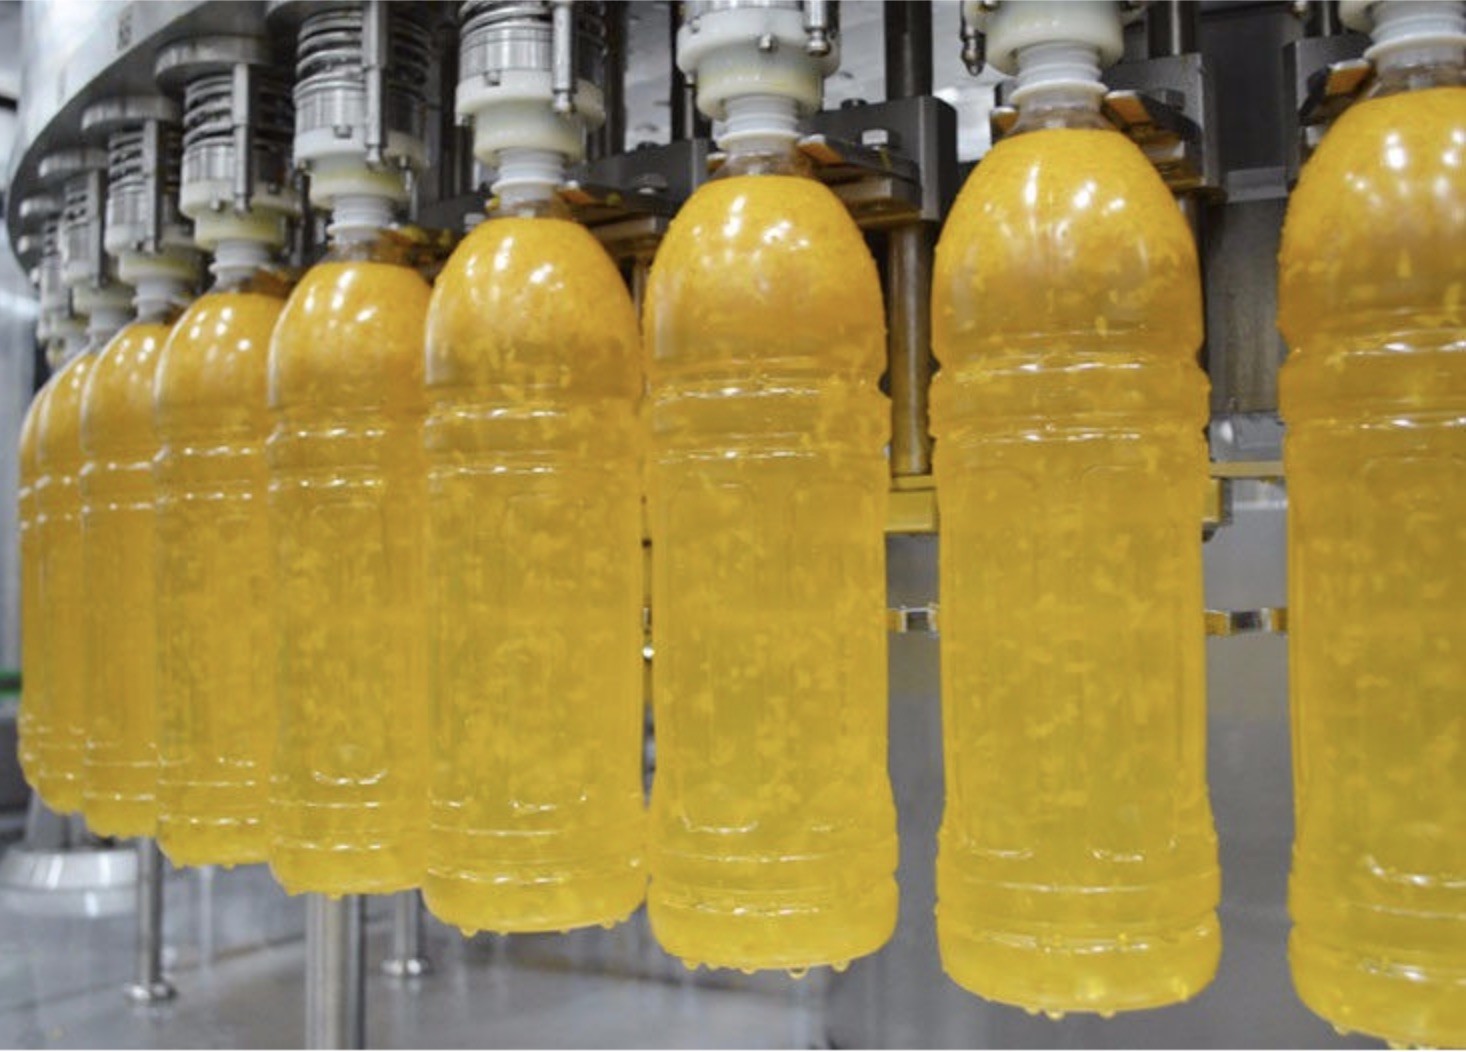 machineries bottles production for mineral water marsu (turkey) | sipa